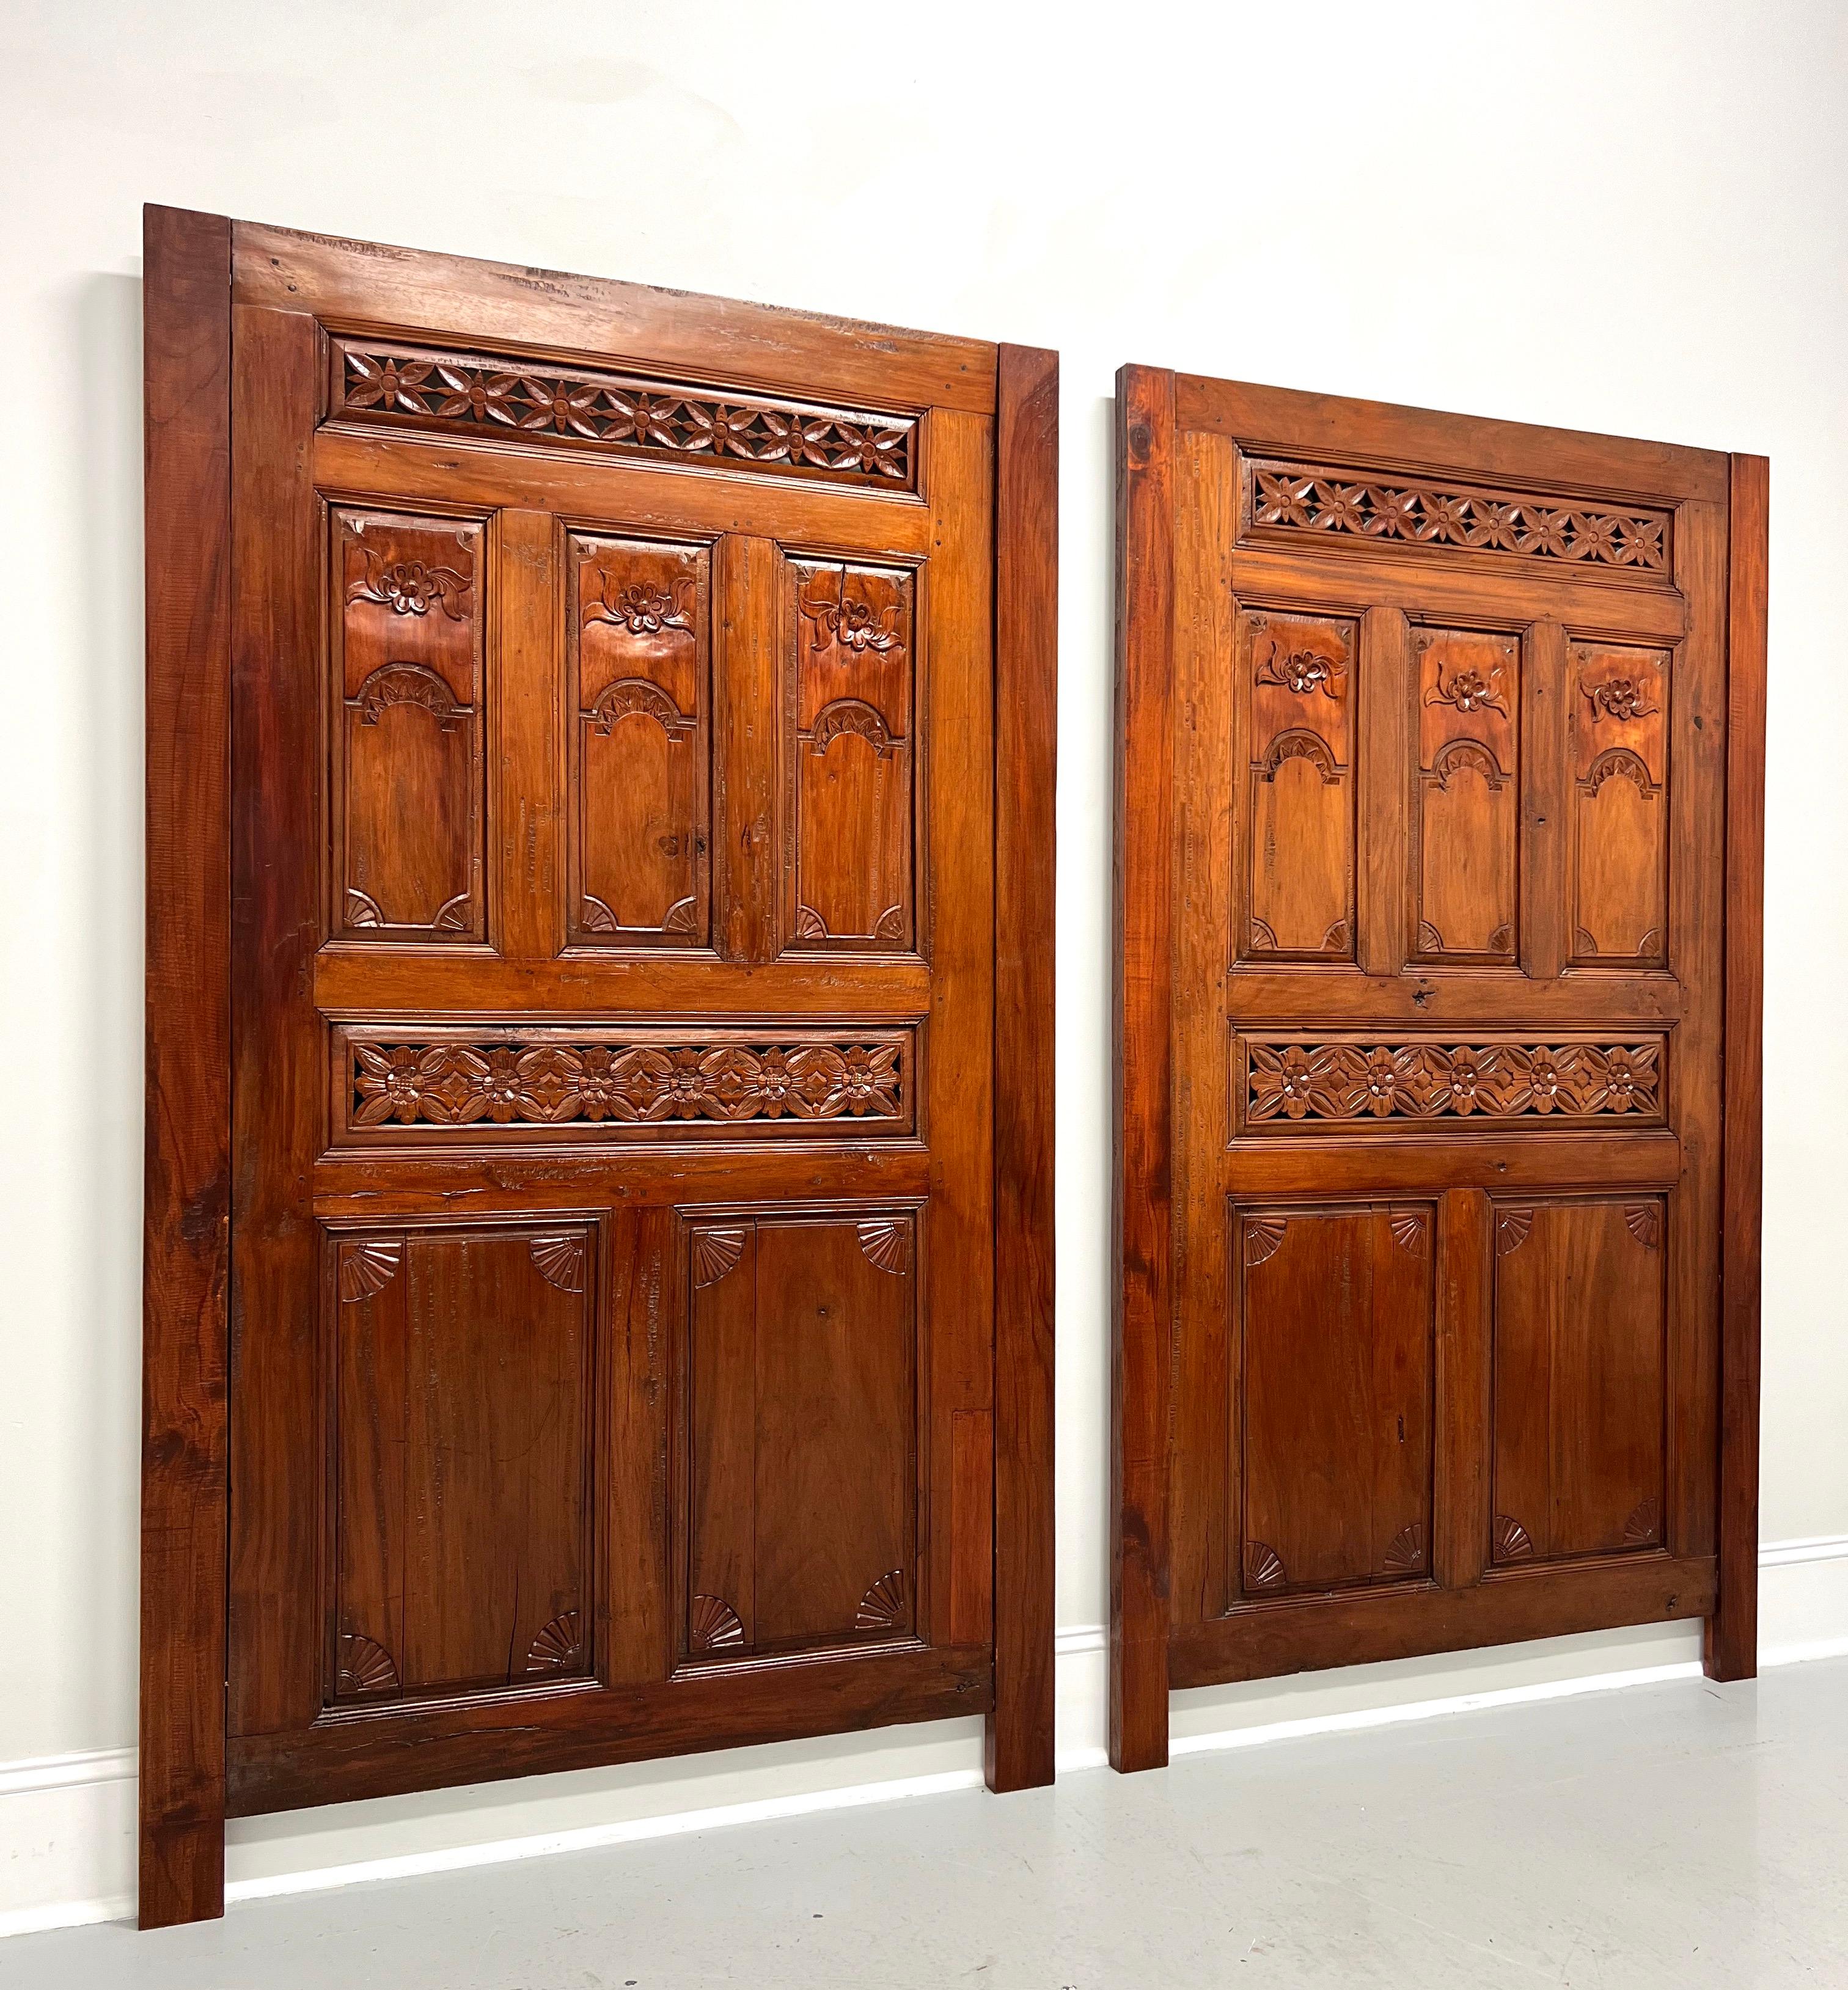 A pair of Asian style Balinese carved doors converted for use as headboards, unbranded. Solid mahogany doors with hand carved details, mounted to matching mahogany side pieces to raise up, and an unfinished back with a removable wall mounting brace.